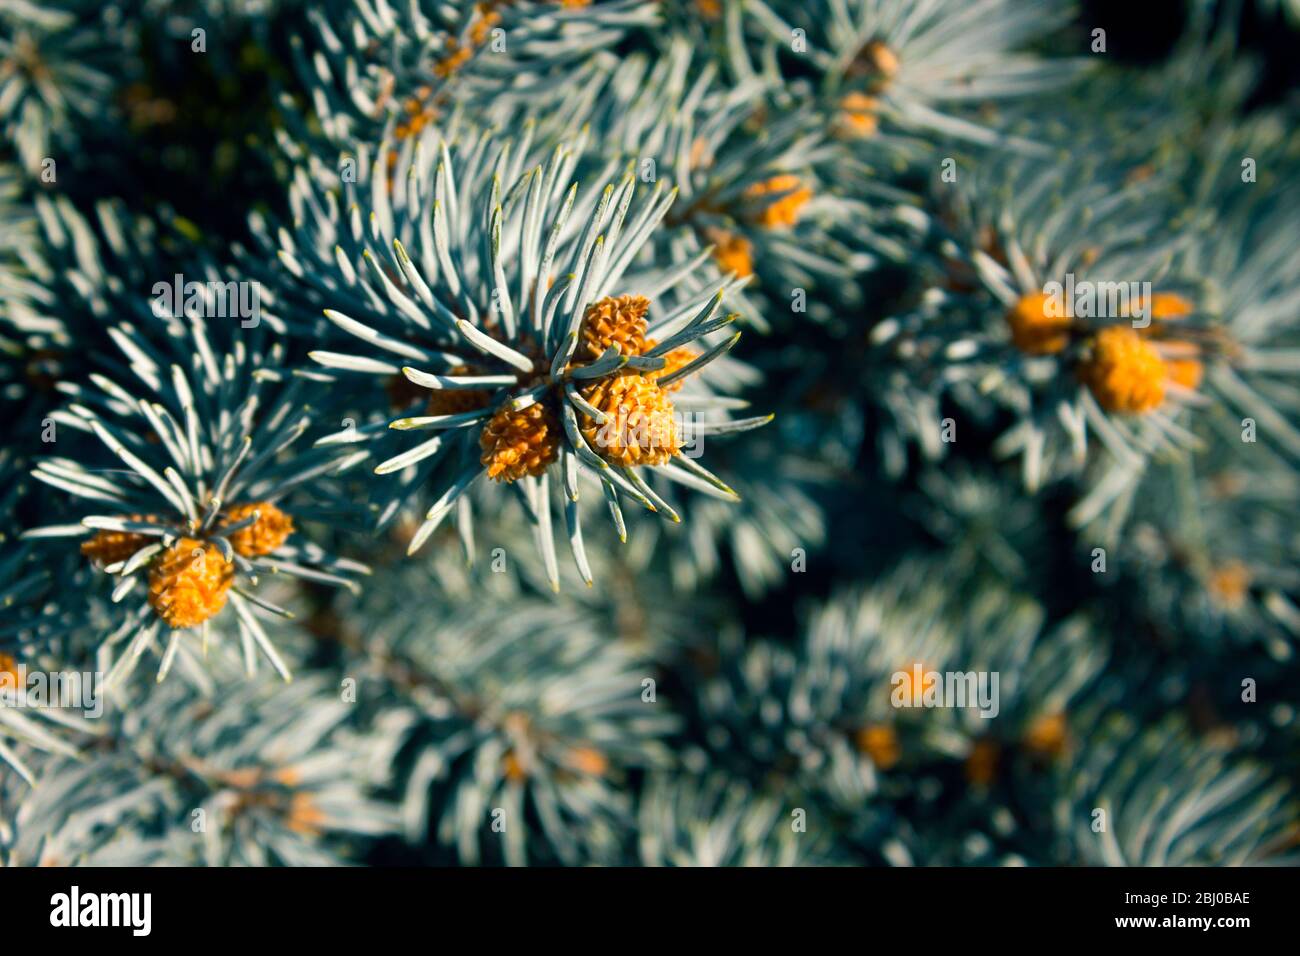 Background image with detail of colorado blue spruce needles and candles. Stock Photo